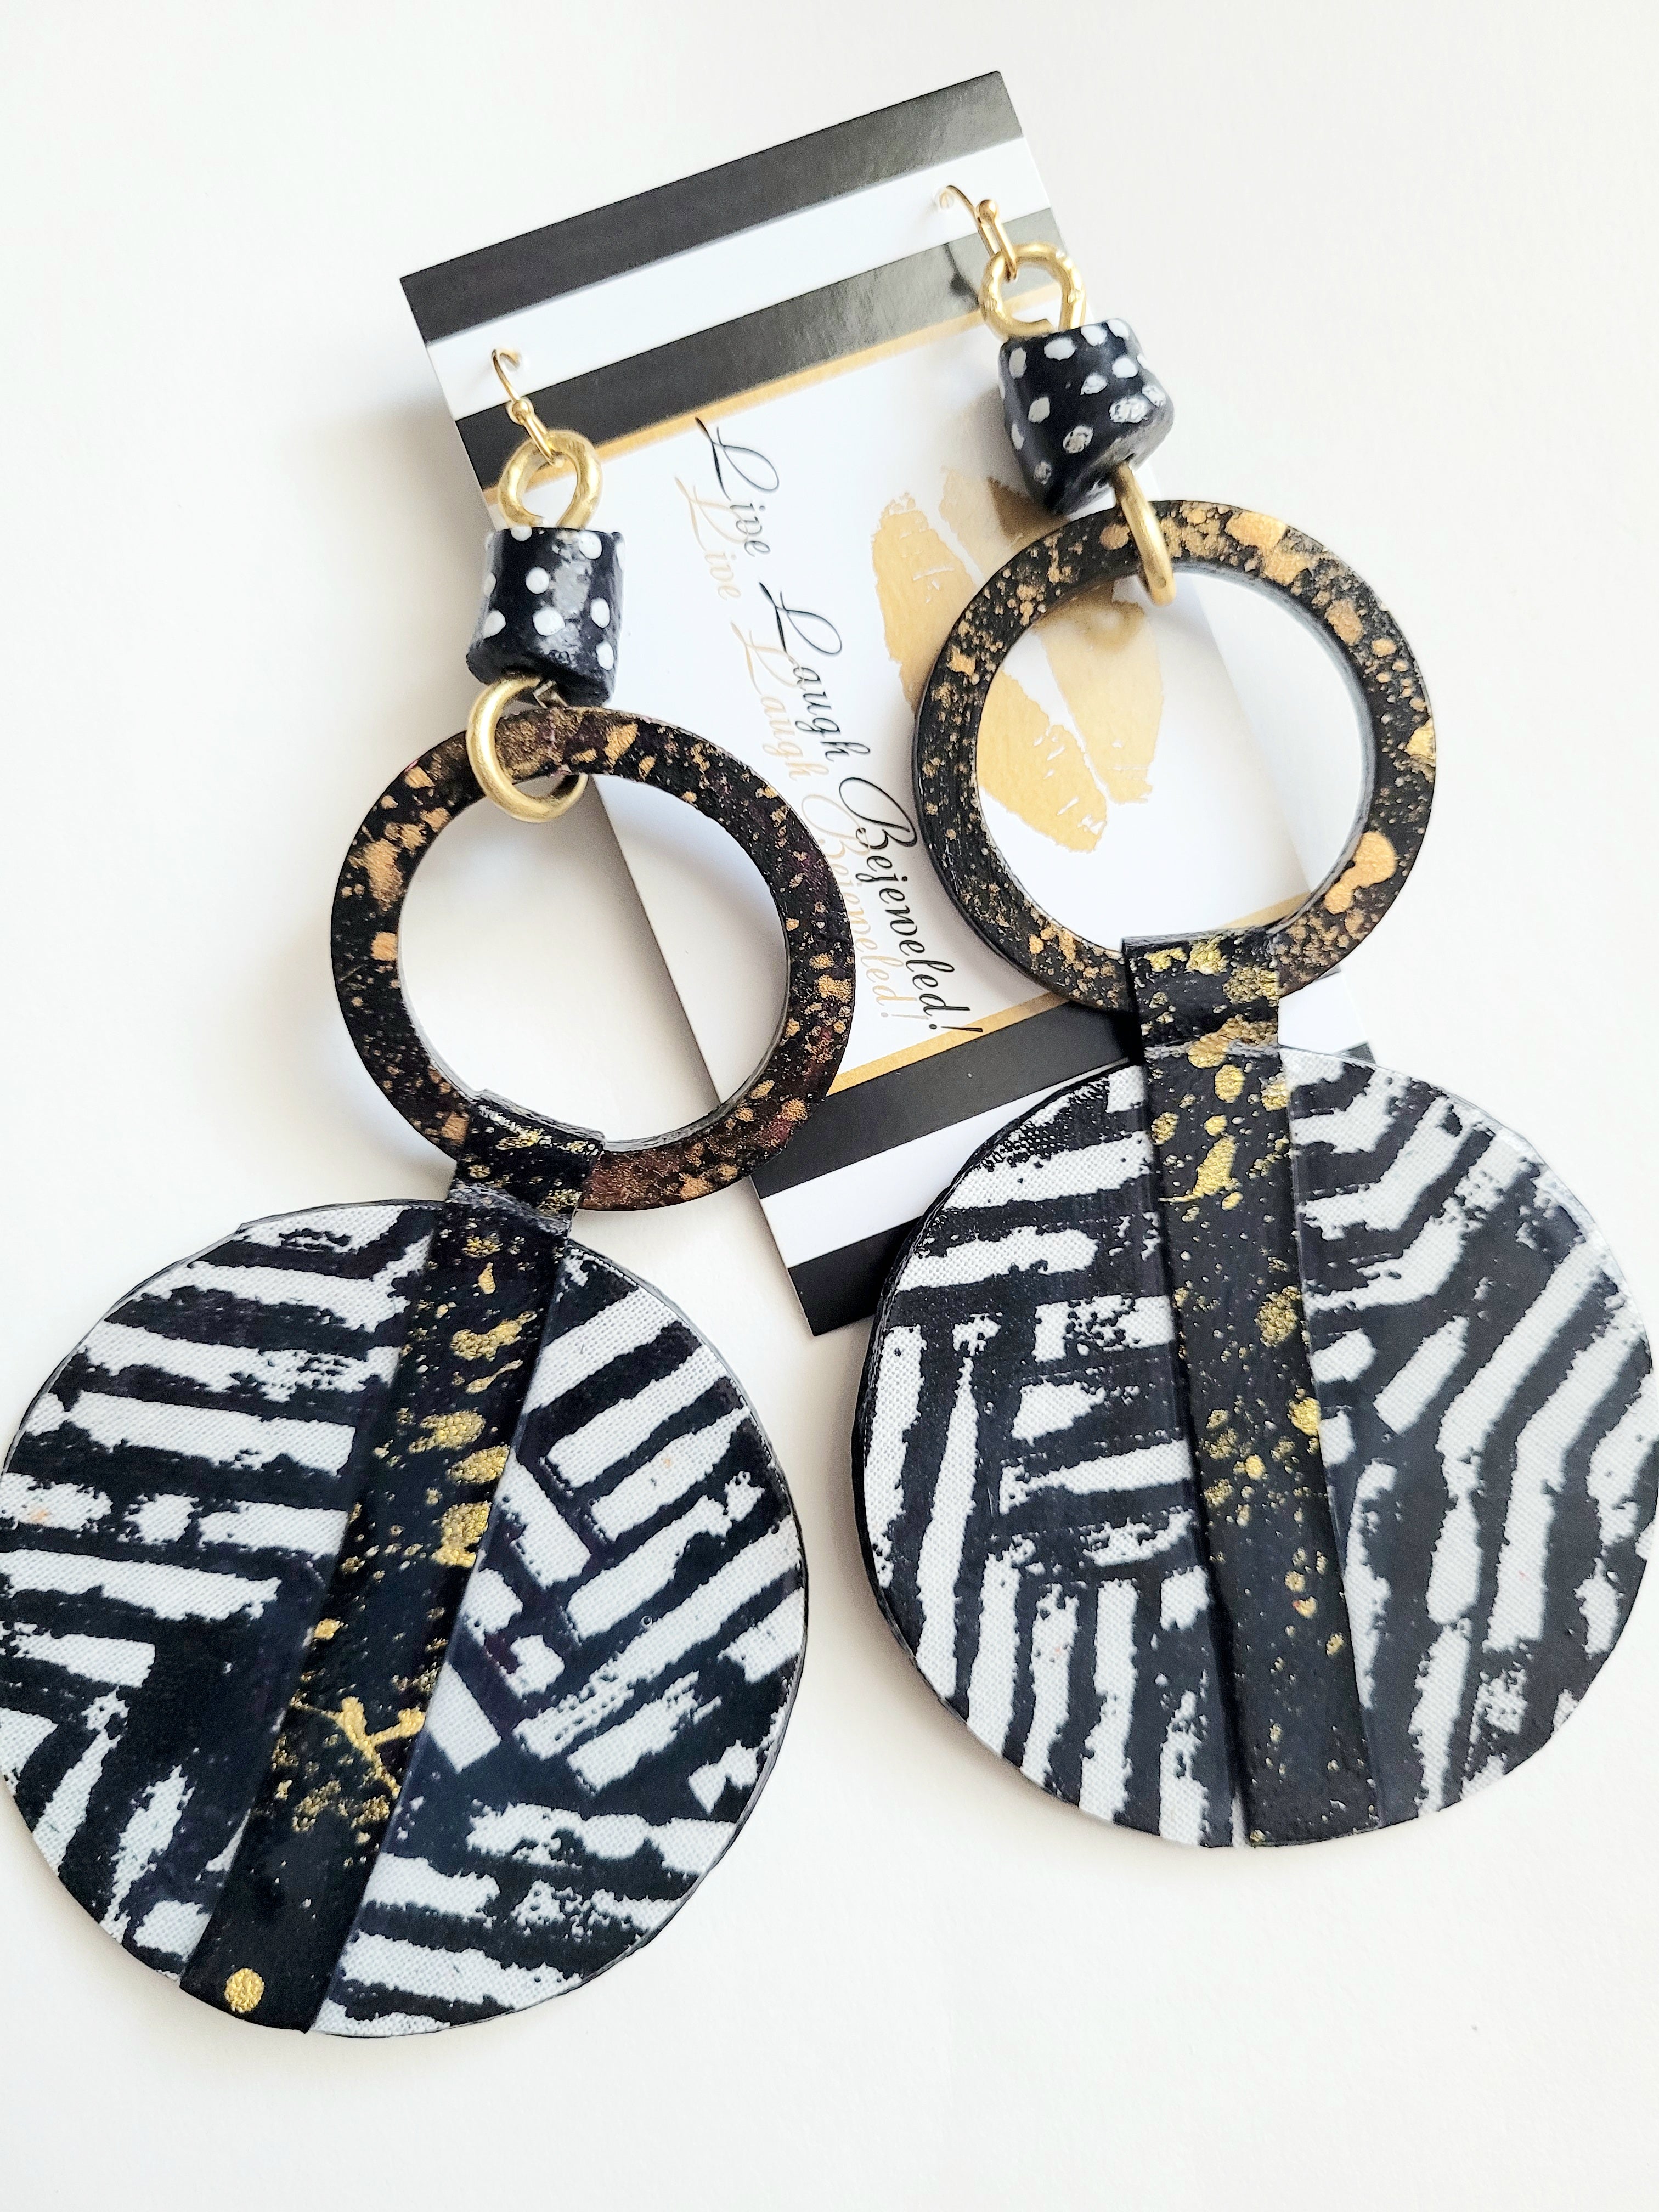 'Mixed Media' Black + White Custom-Painted Ankara + Wood + Leather Dangles (only 1 pair)